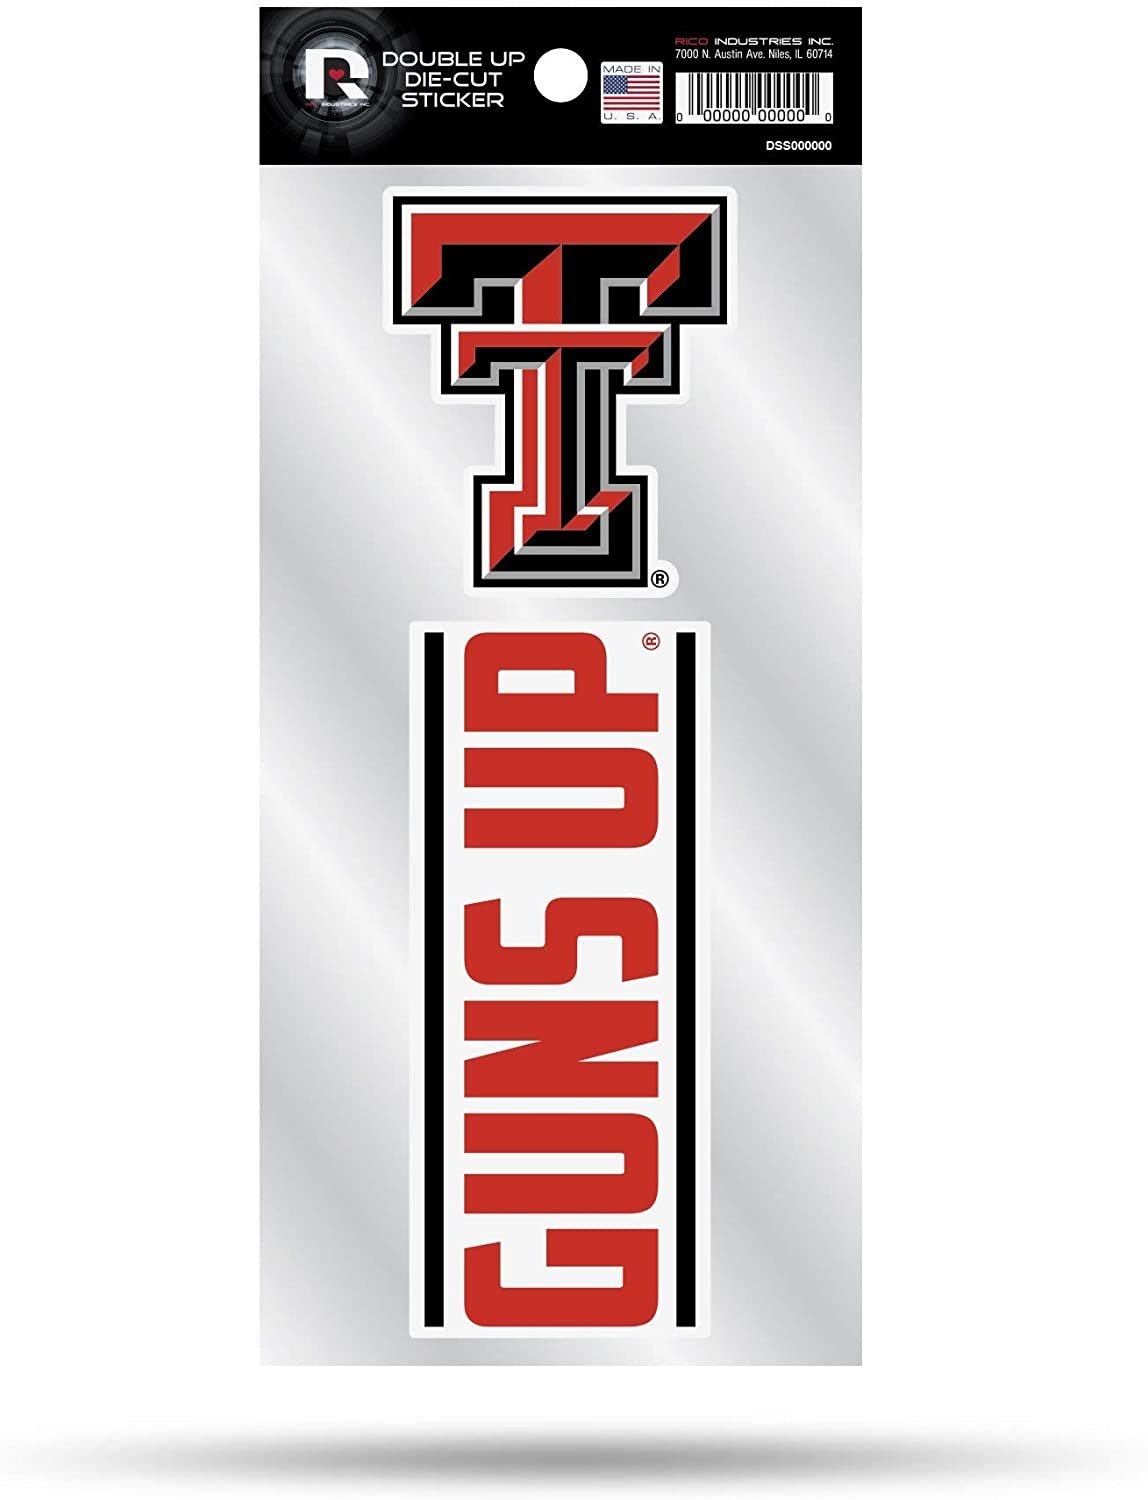 Texas Tech University Red Raiders 2-Piece Double Up Die Cut Sticker Decal Sheet, 4x8 Inch